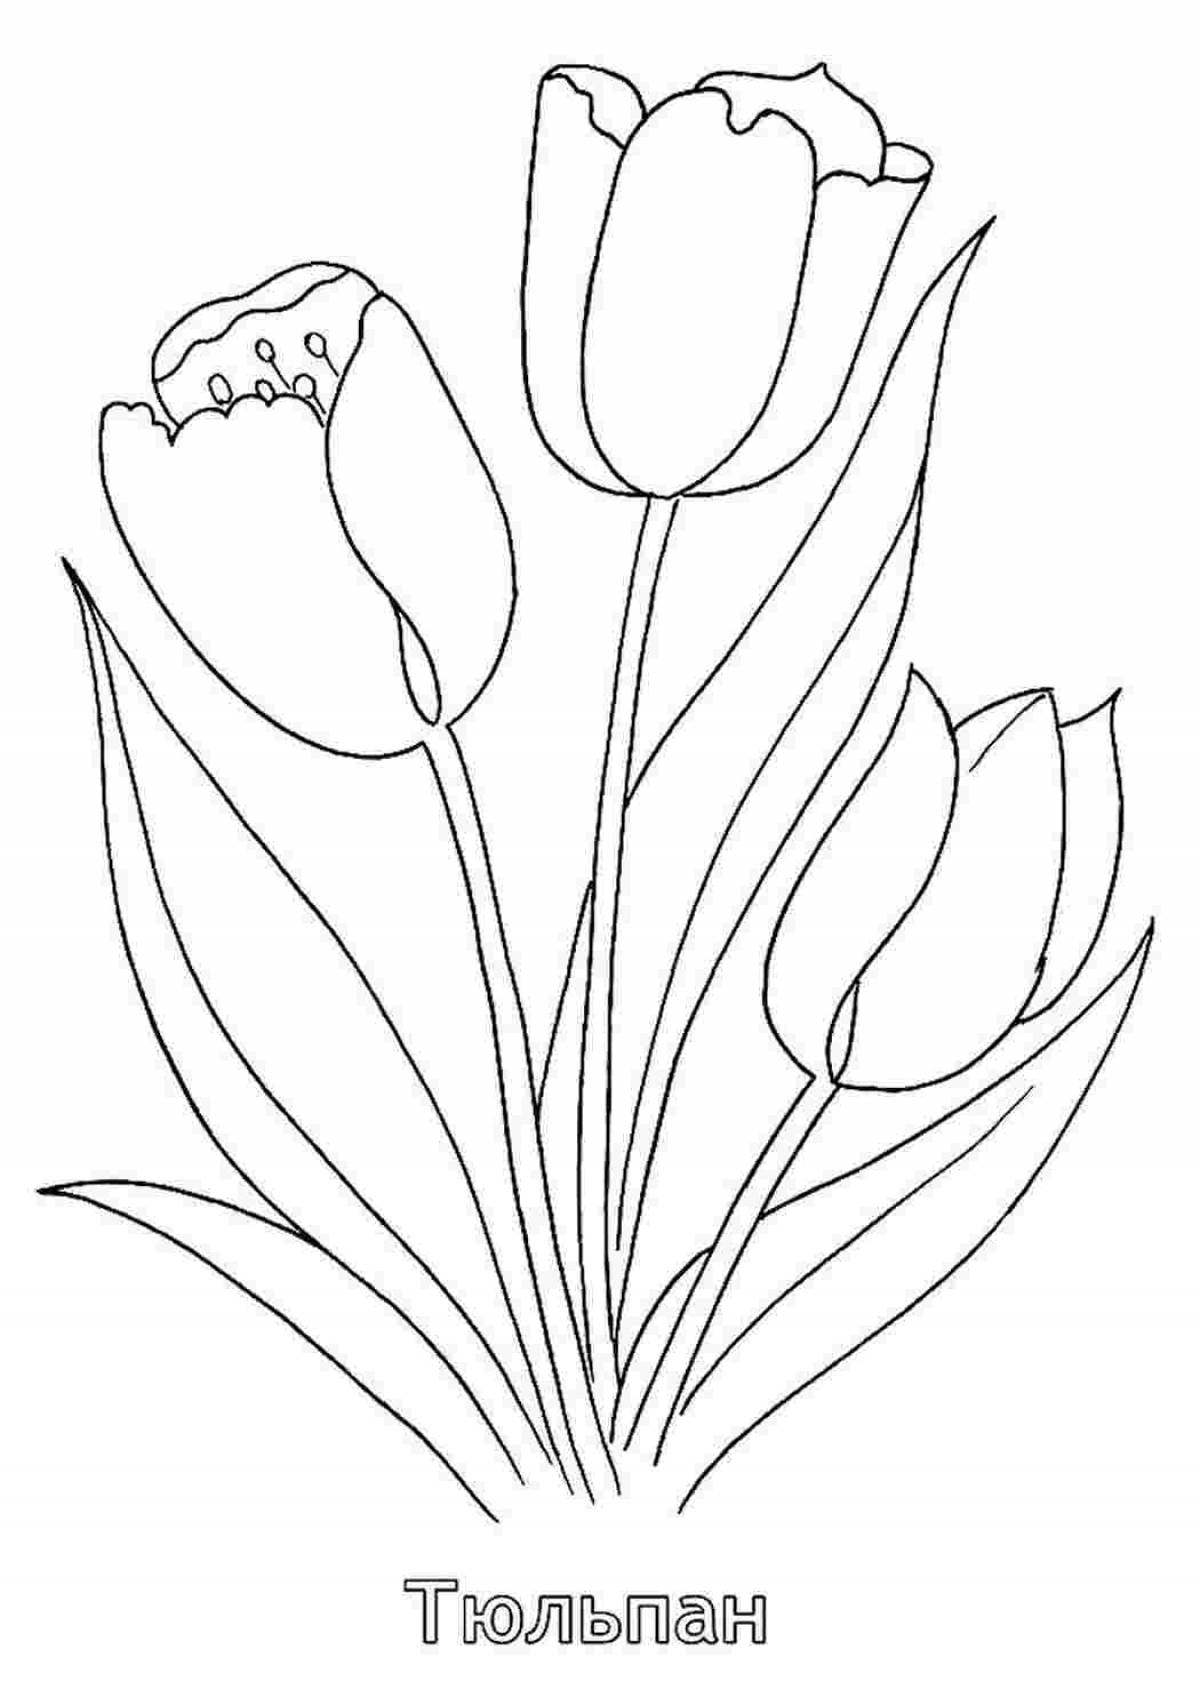 Joyful tulips coloring for the little ones